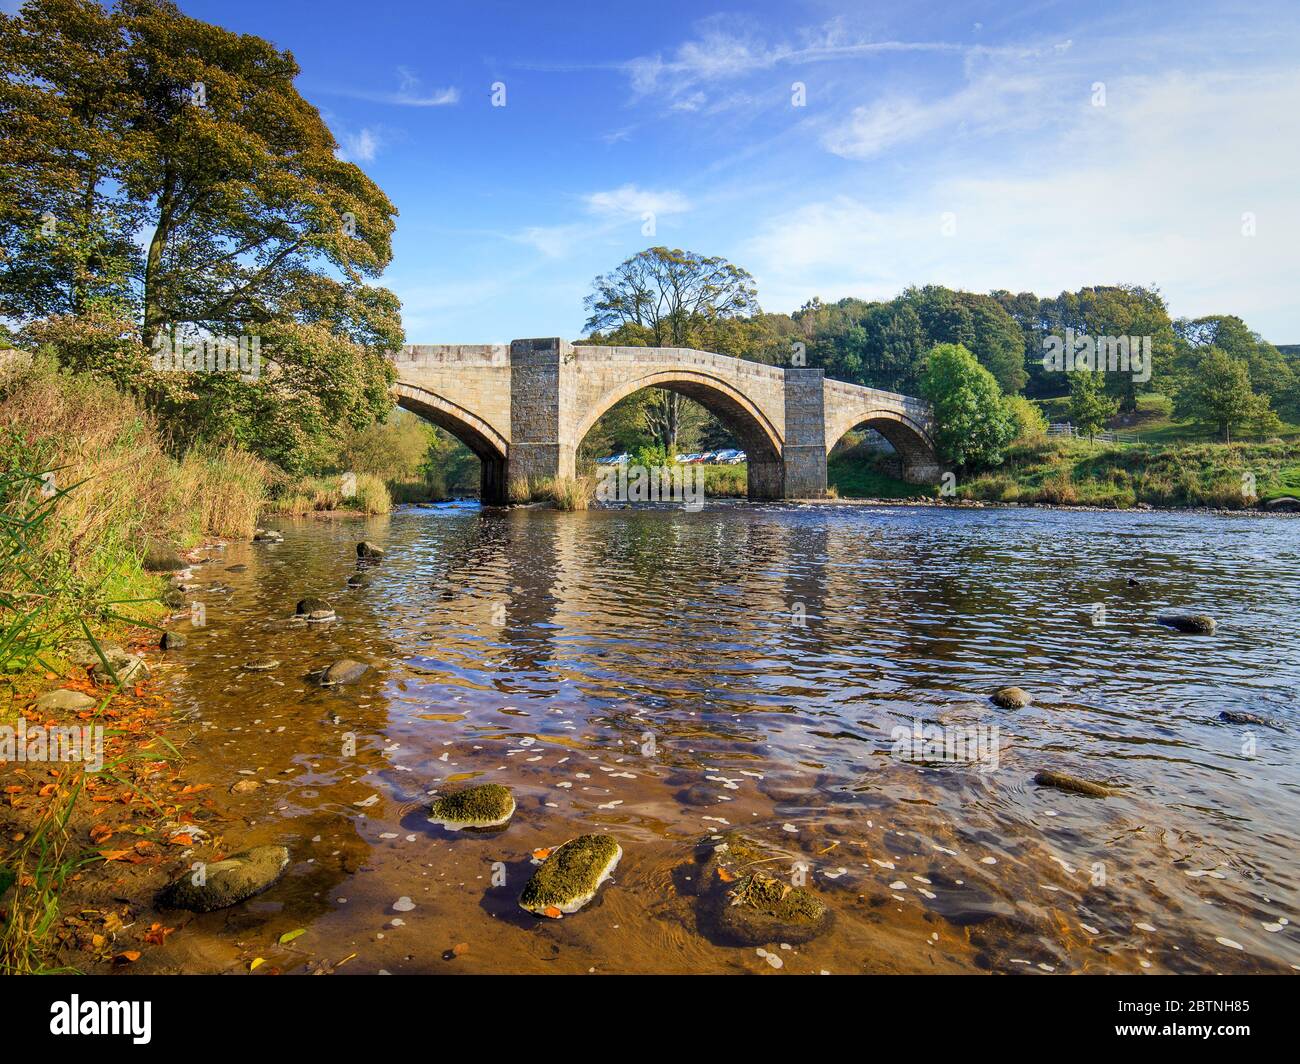 Barden Bridge and the River Wharfe, in Upper Wharfedale, Yorkshire Dales National Park UK Stock Photo